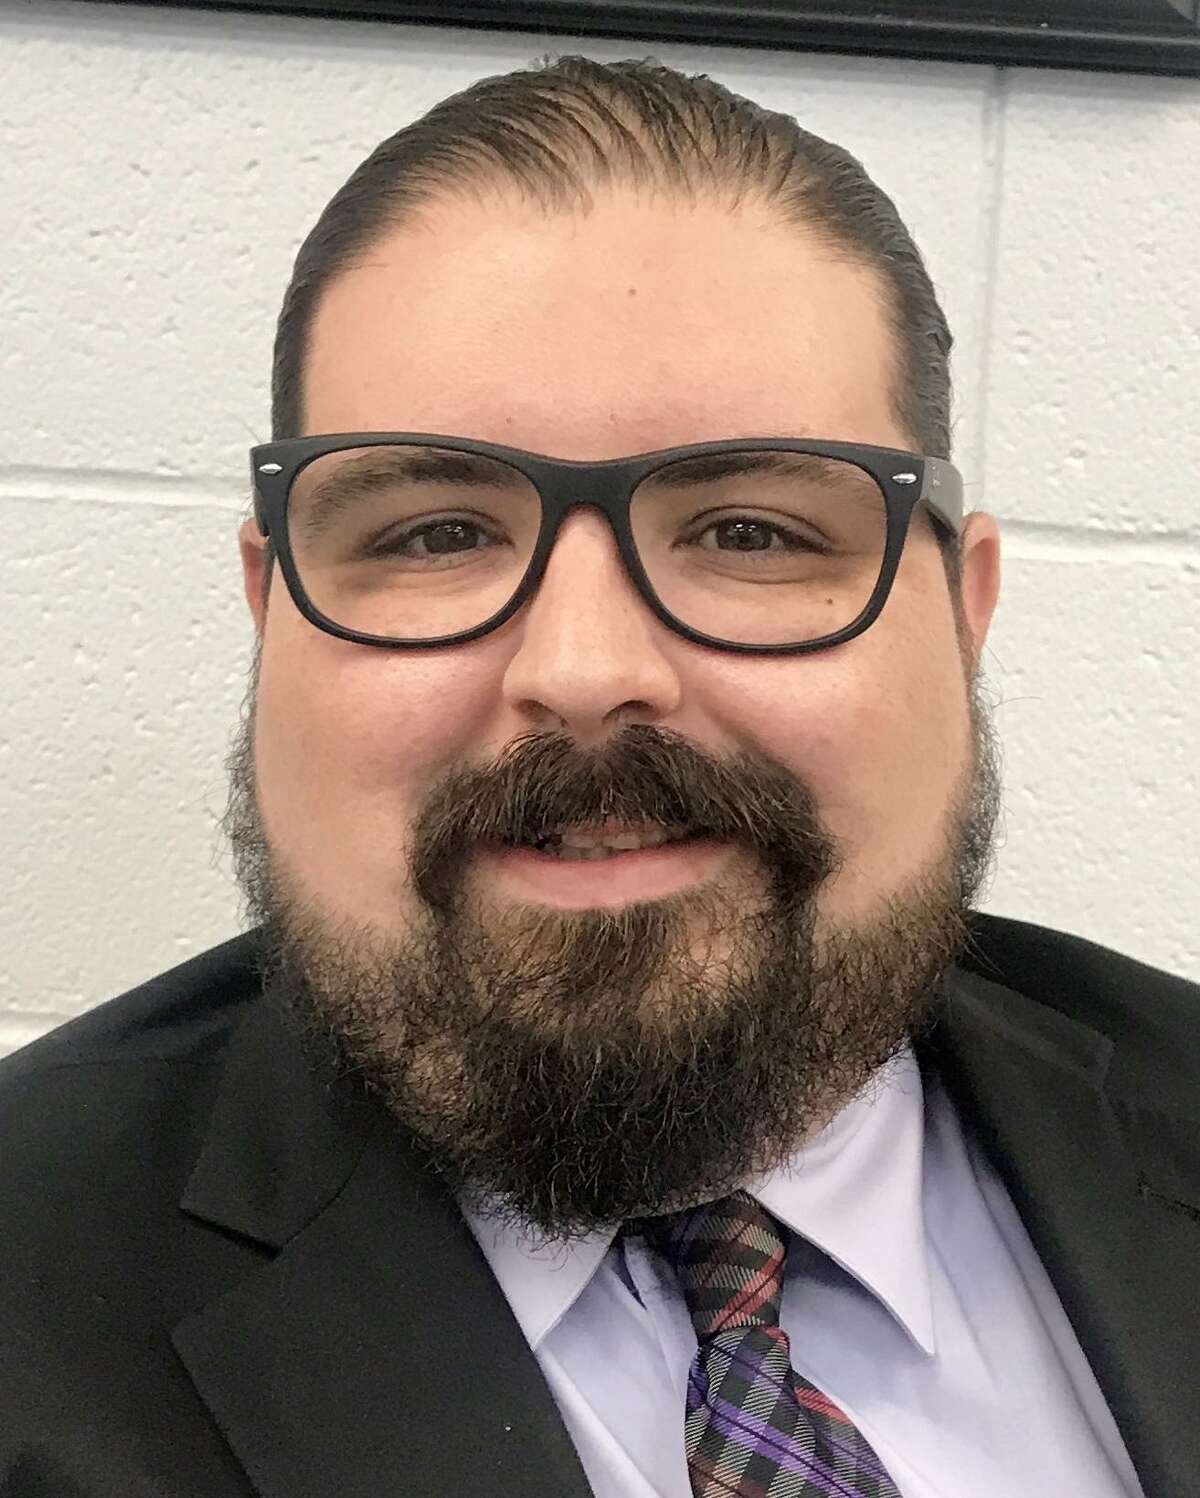 Lorenzo Gonzalez, 31, is a candidate for Place 6 on the Harlandale ISD board in the May 4, 2019 election.